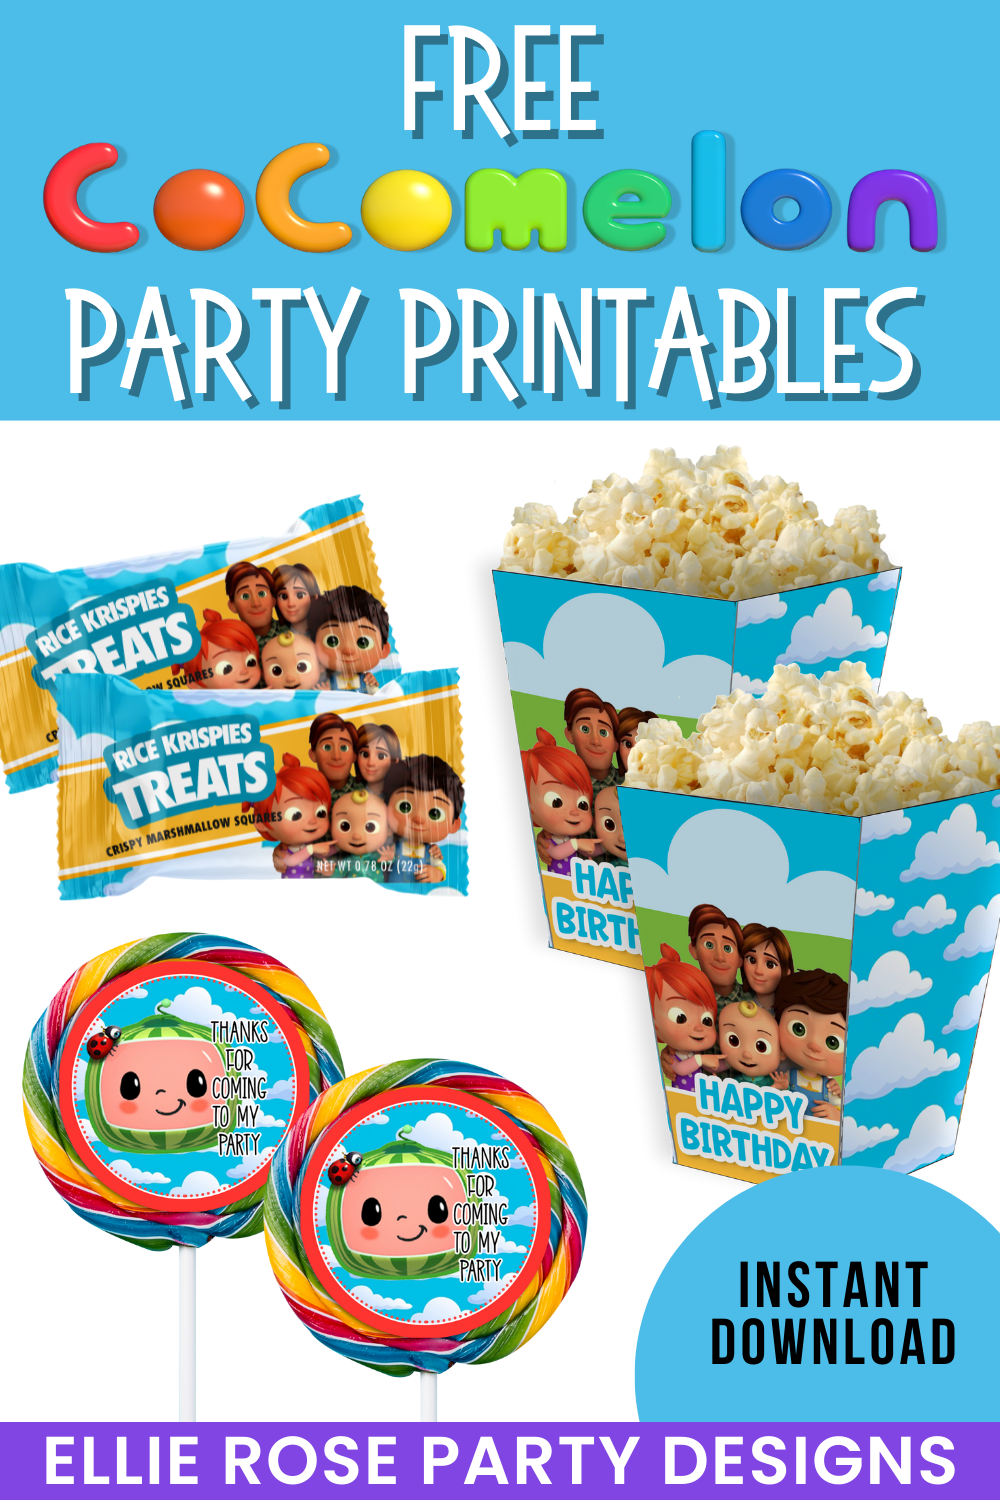 FREE PRINTABLE COCOMELON PARTY DECORATIONS